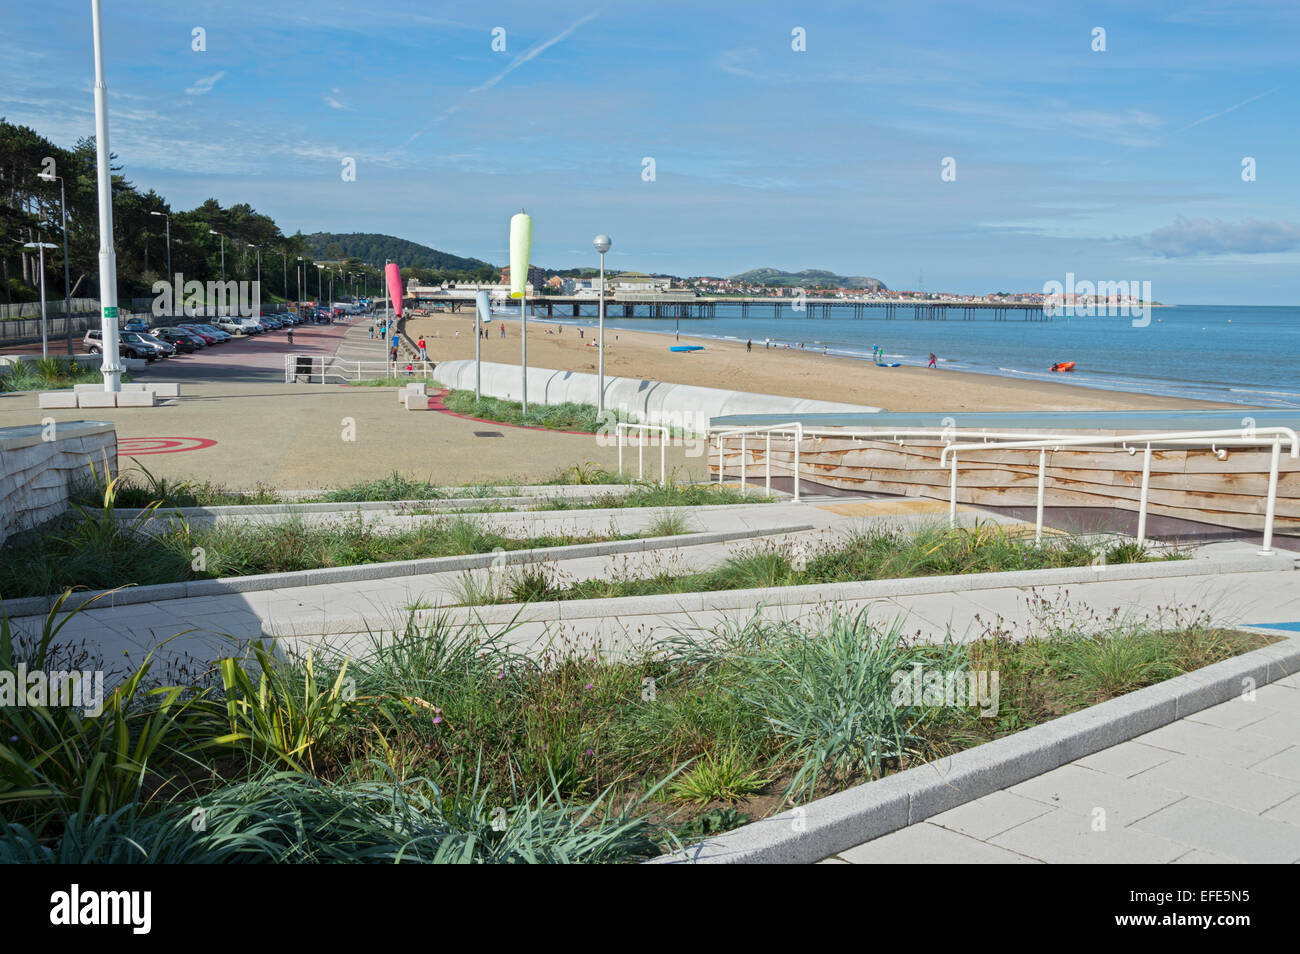 Rhos on sea, Colwyn Bay, seafront, beach, North Wales, uk Stock Photo